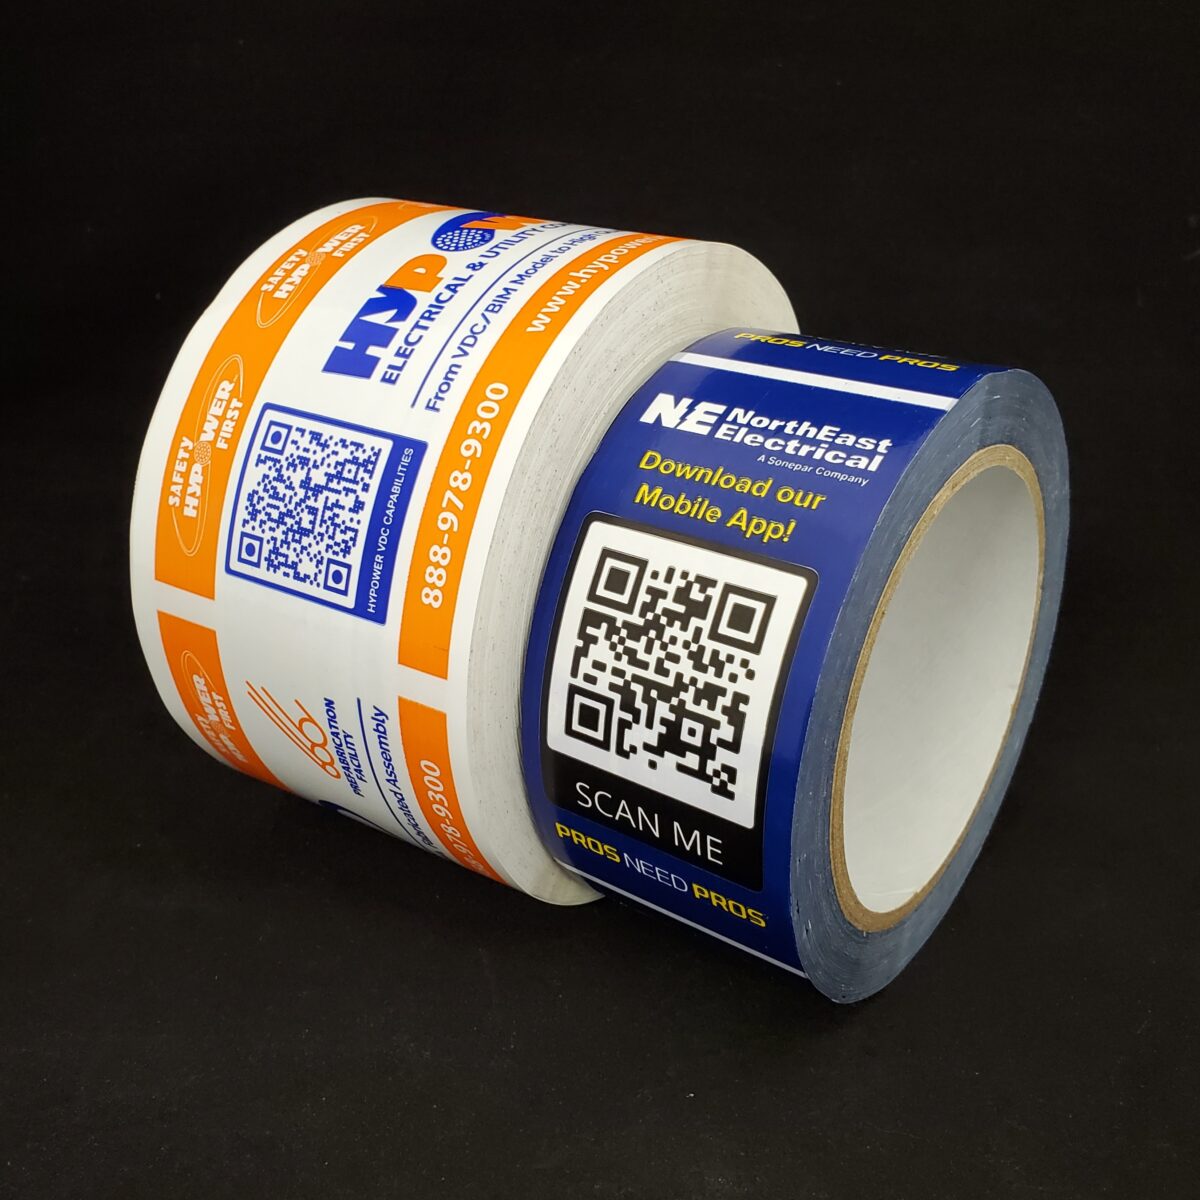 10 Marketing Benefits of QR Codes on Branded Packing Tape